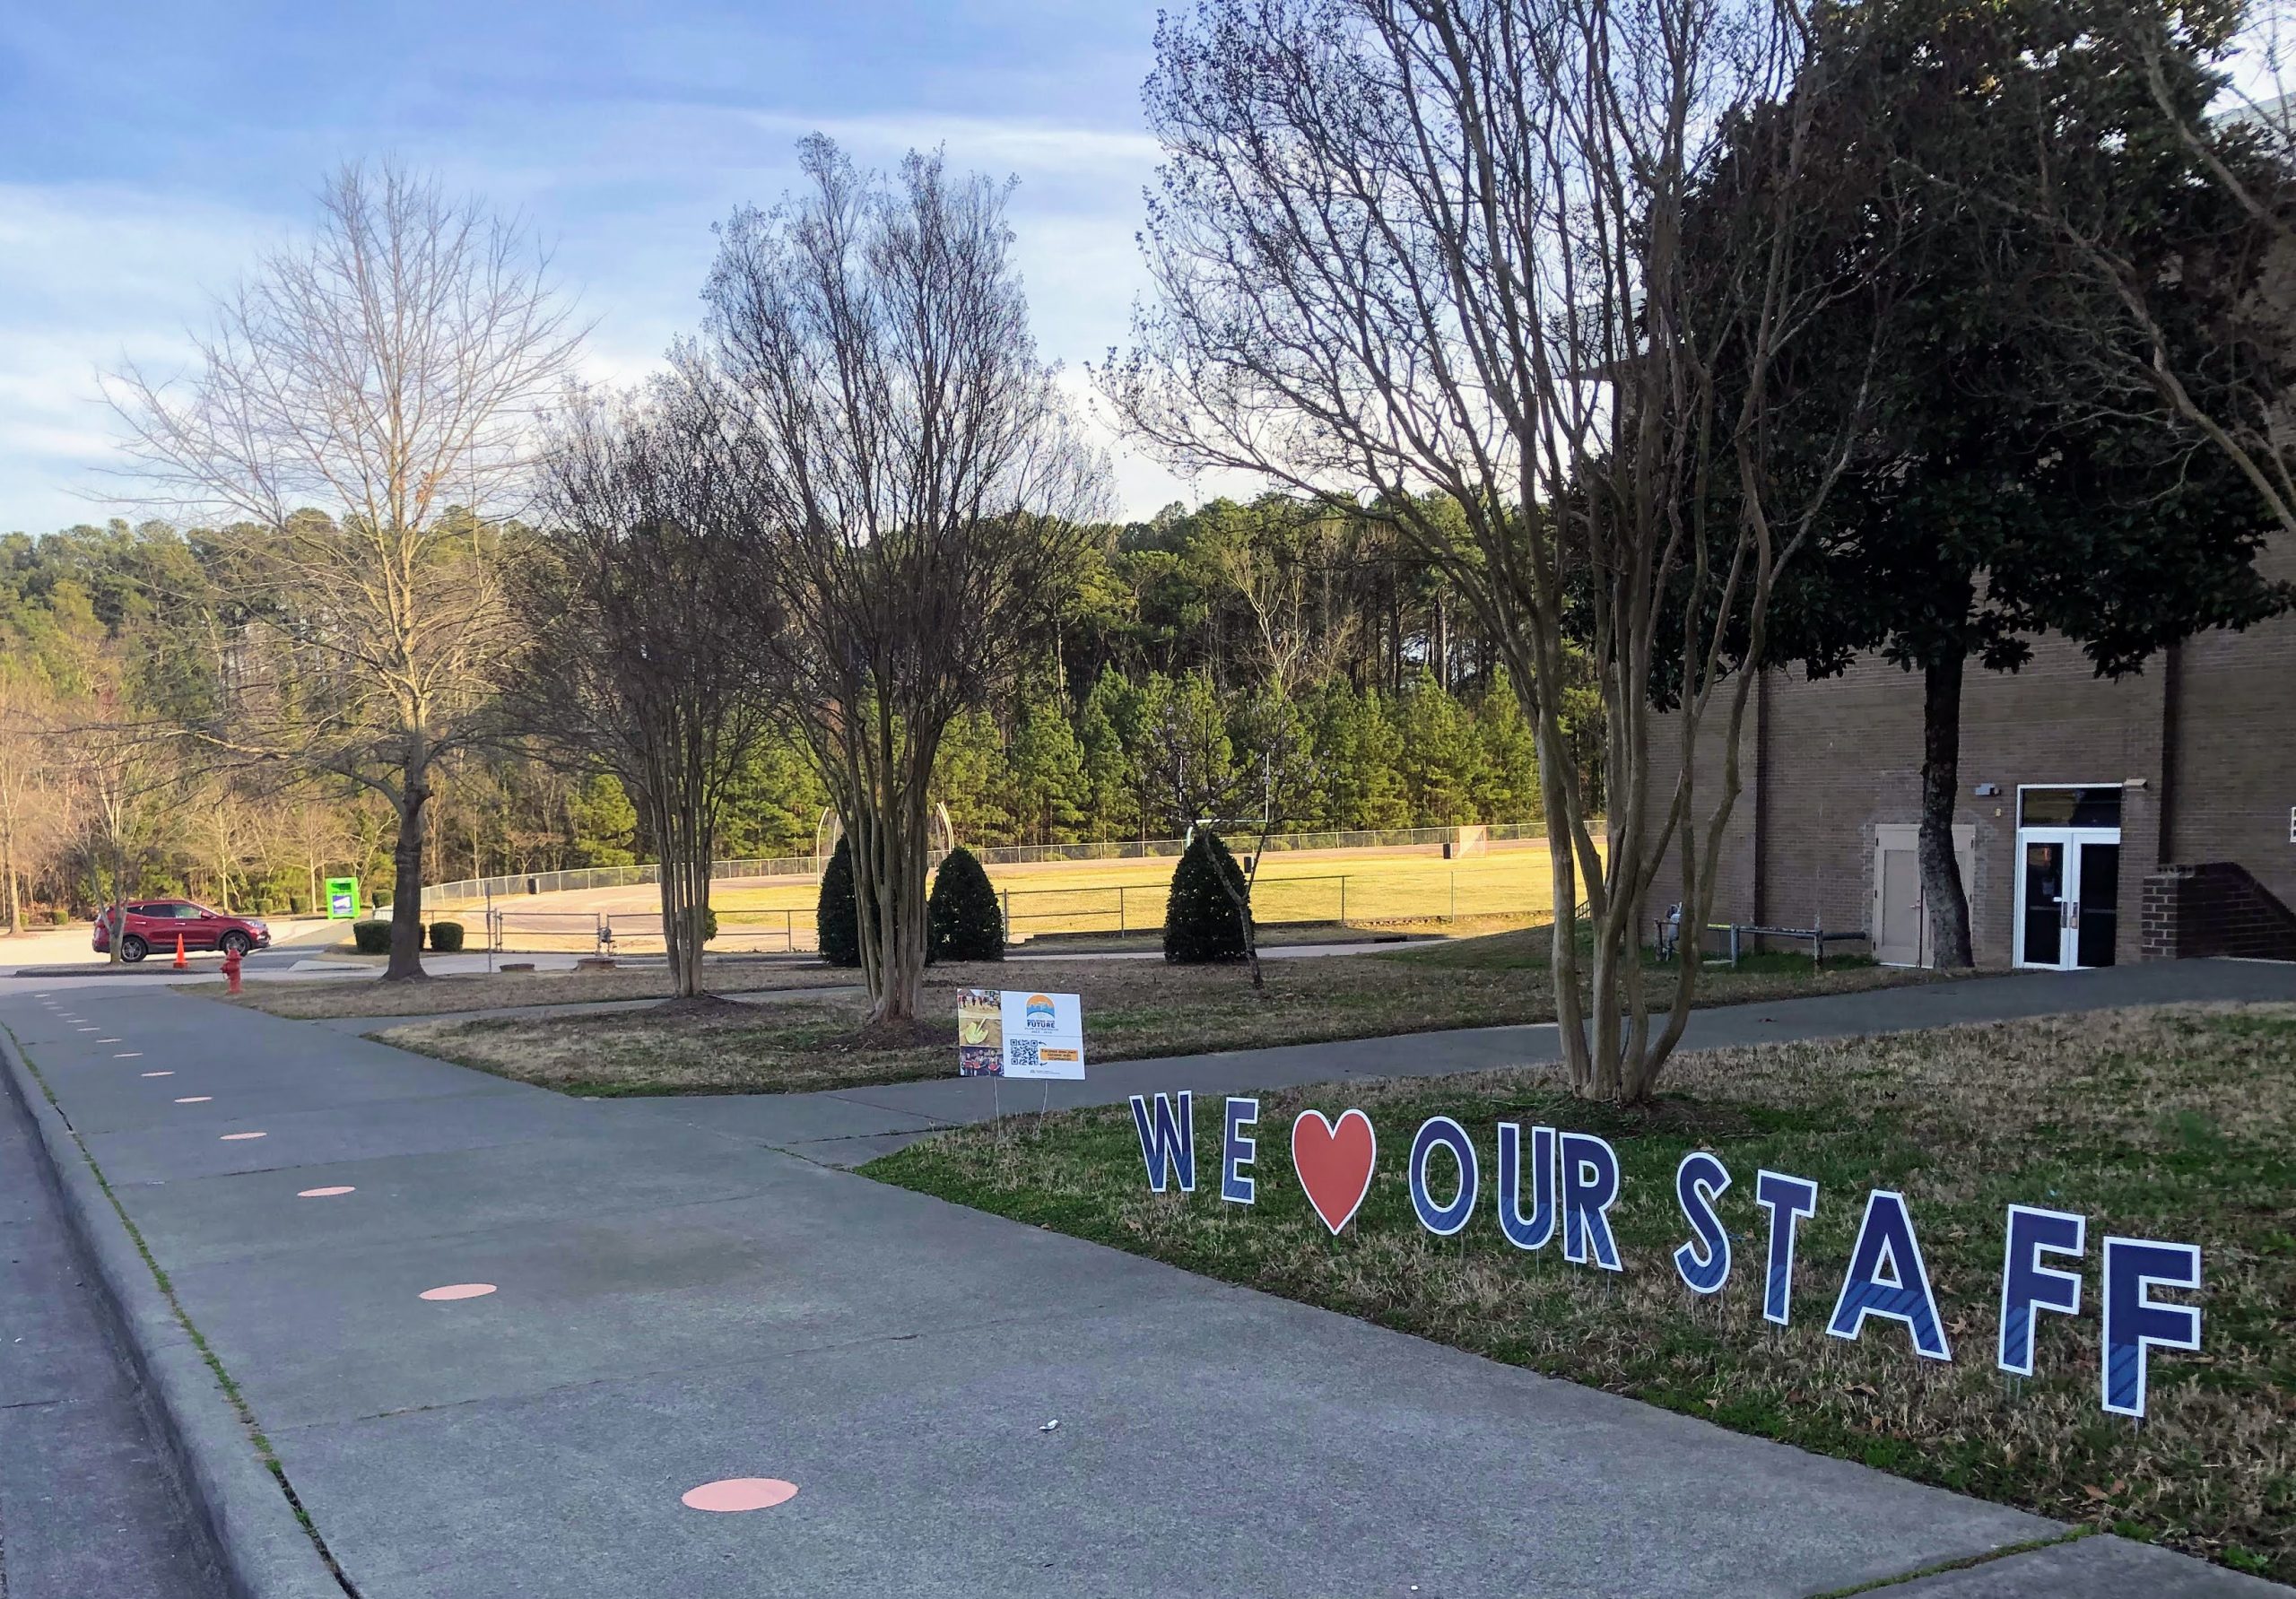 Rogers-Herr Middle School displays sign saying "We love our staff"